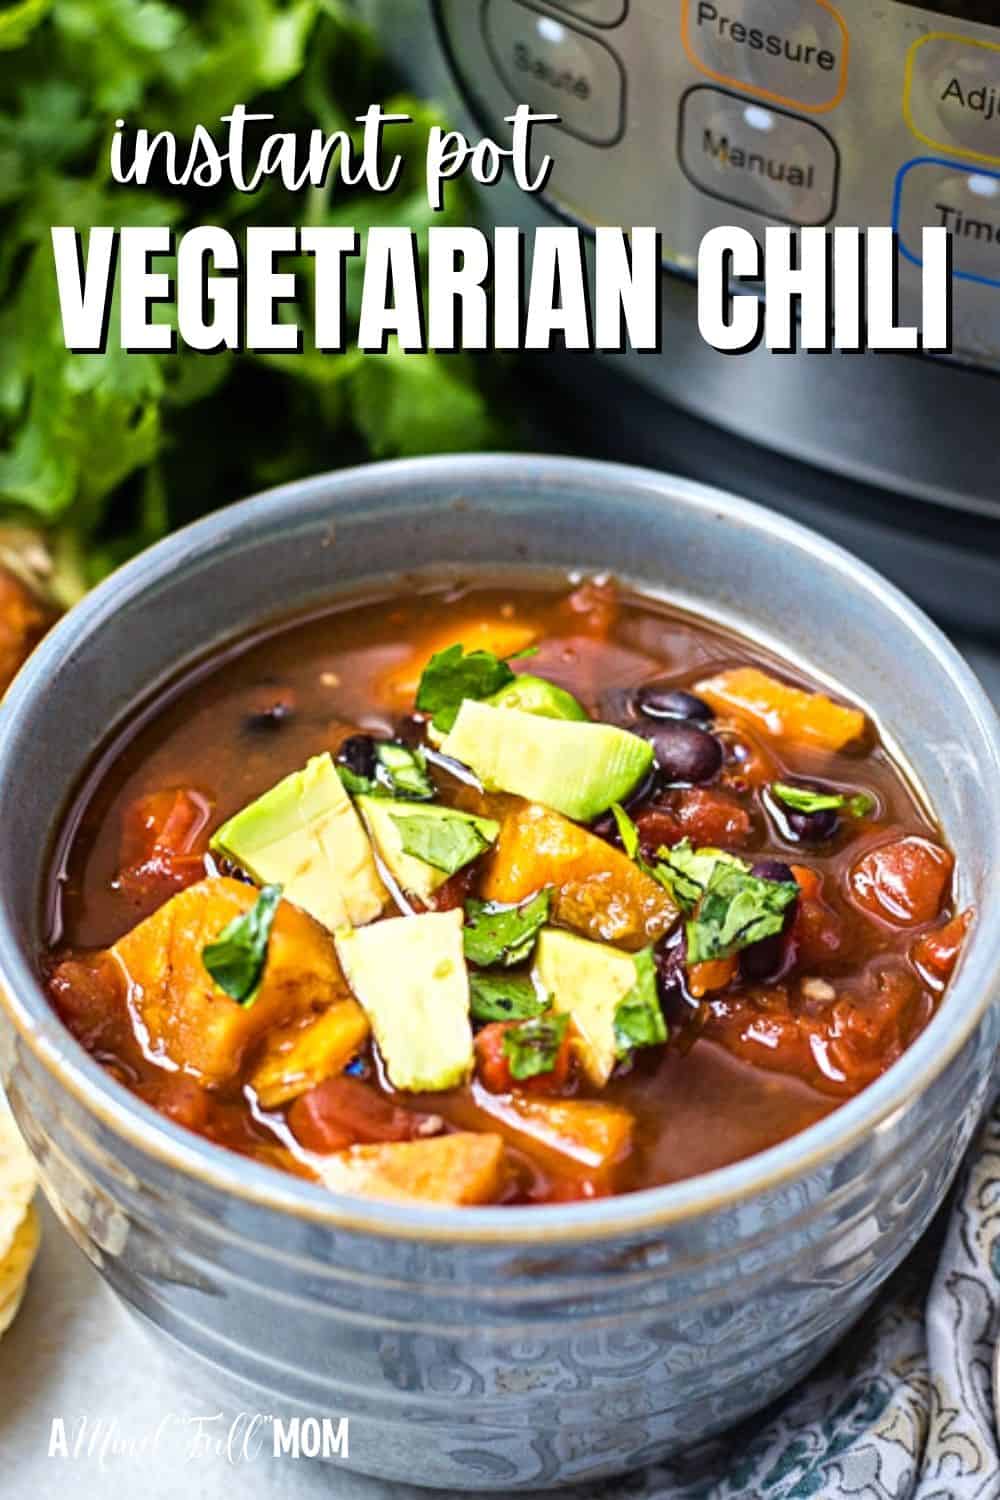 Instant Pot Vegetarian Chili is a hearty recipe for a vegan-friendly chili that is packed with sweet potatoes, beans, and flavor. And thanks to the Instant Pot, it can be on your table in under an hour!